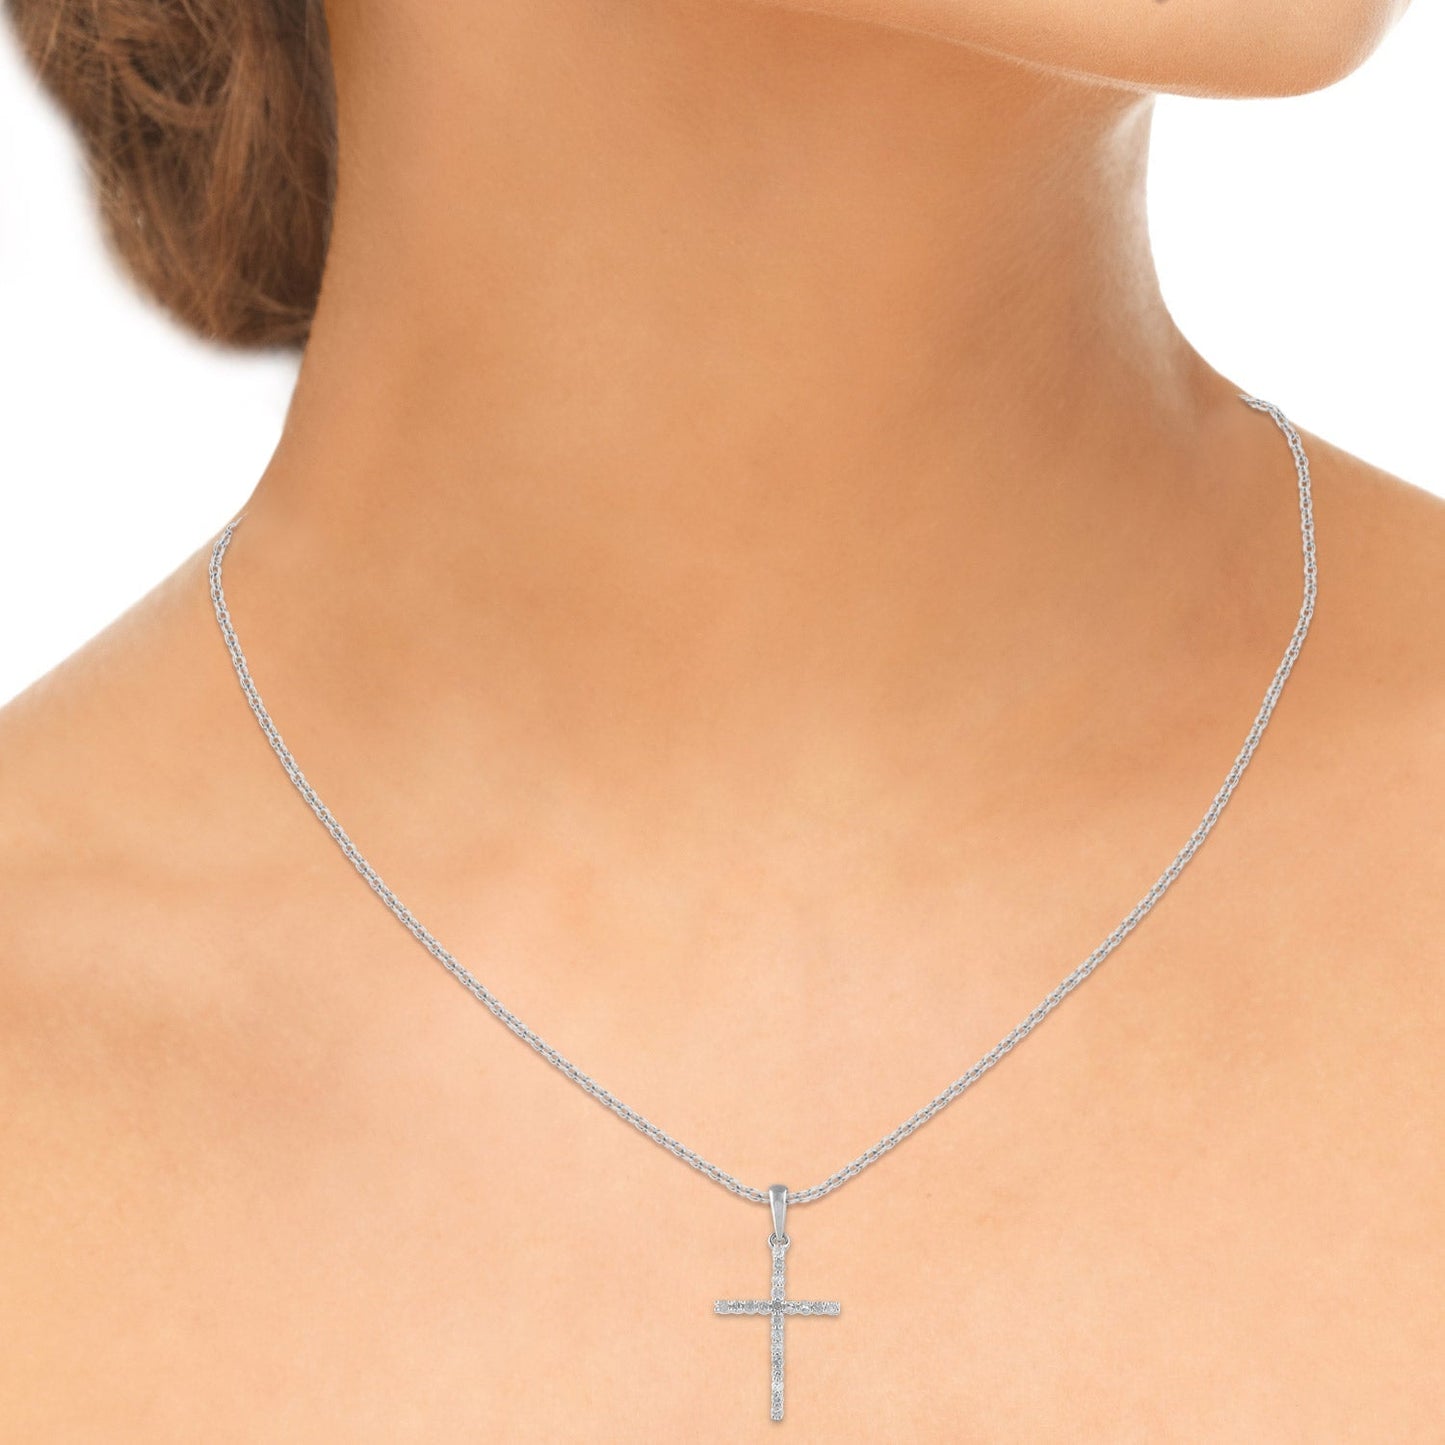 1/4 Carat Natural Round Diamonds Cross Pendant Necklace in 10K Gold